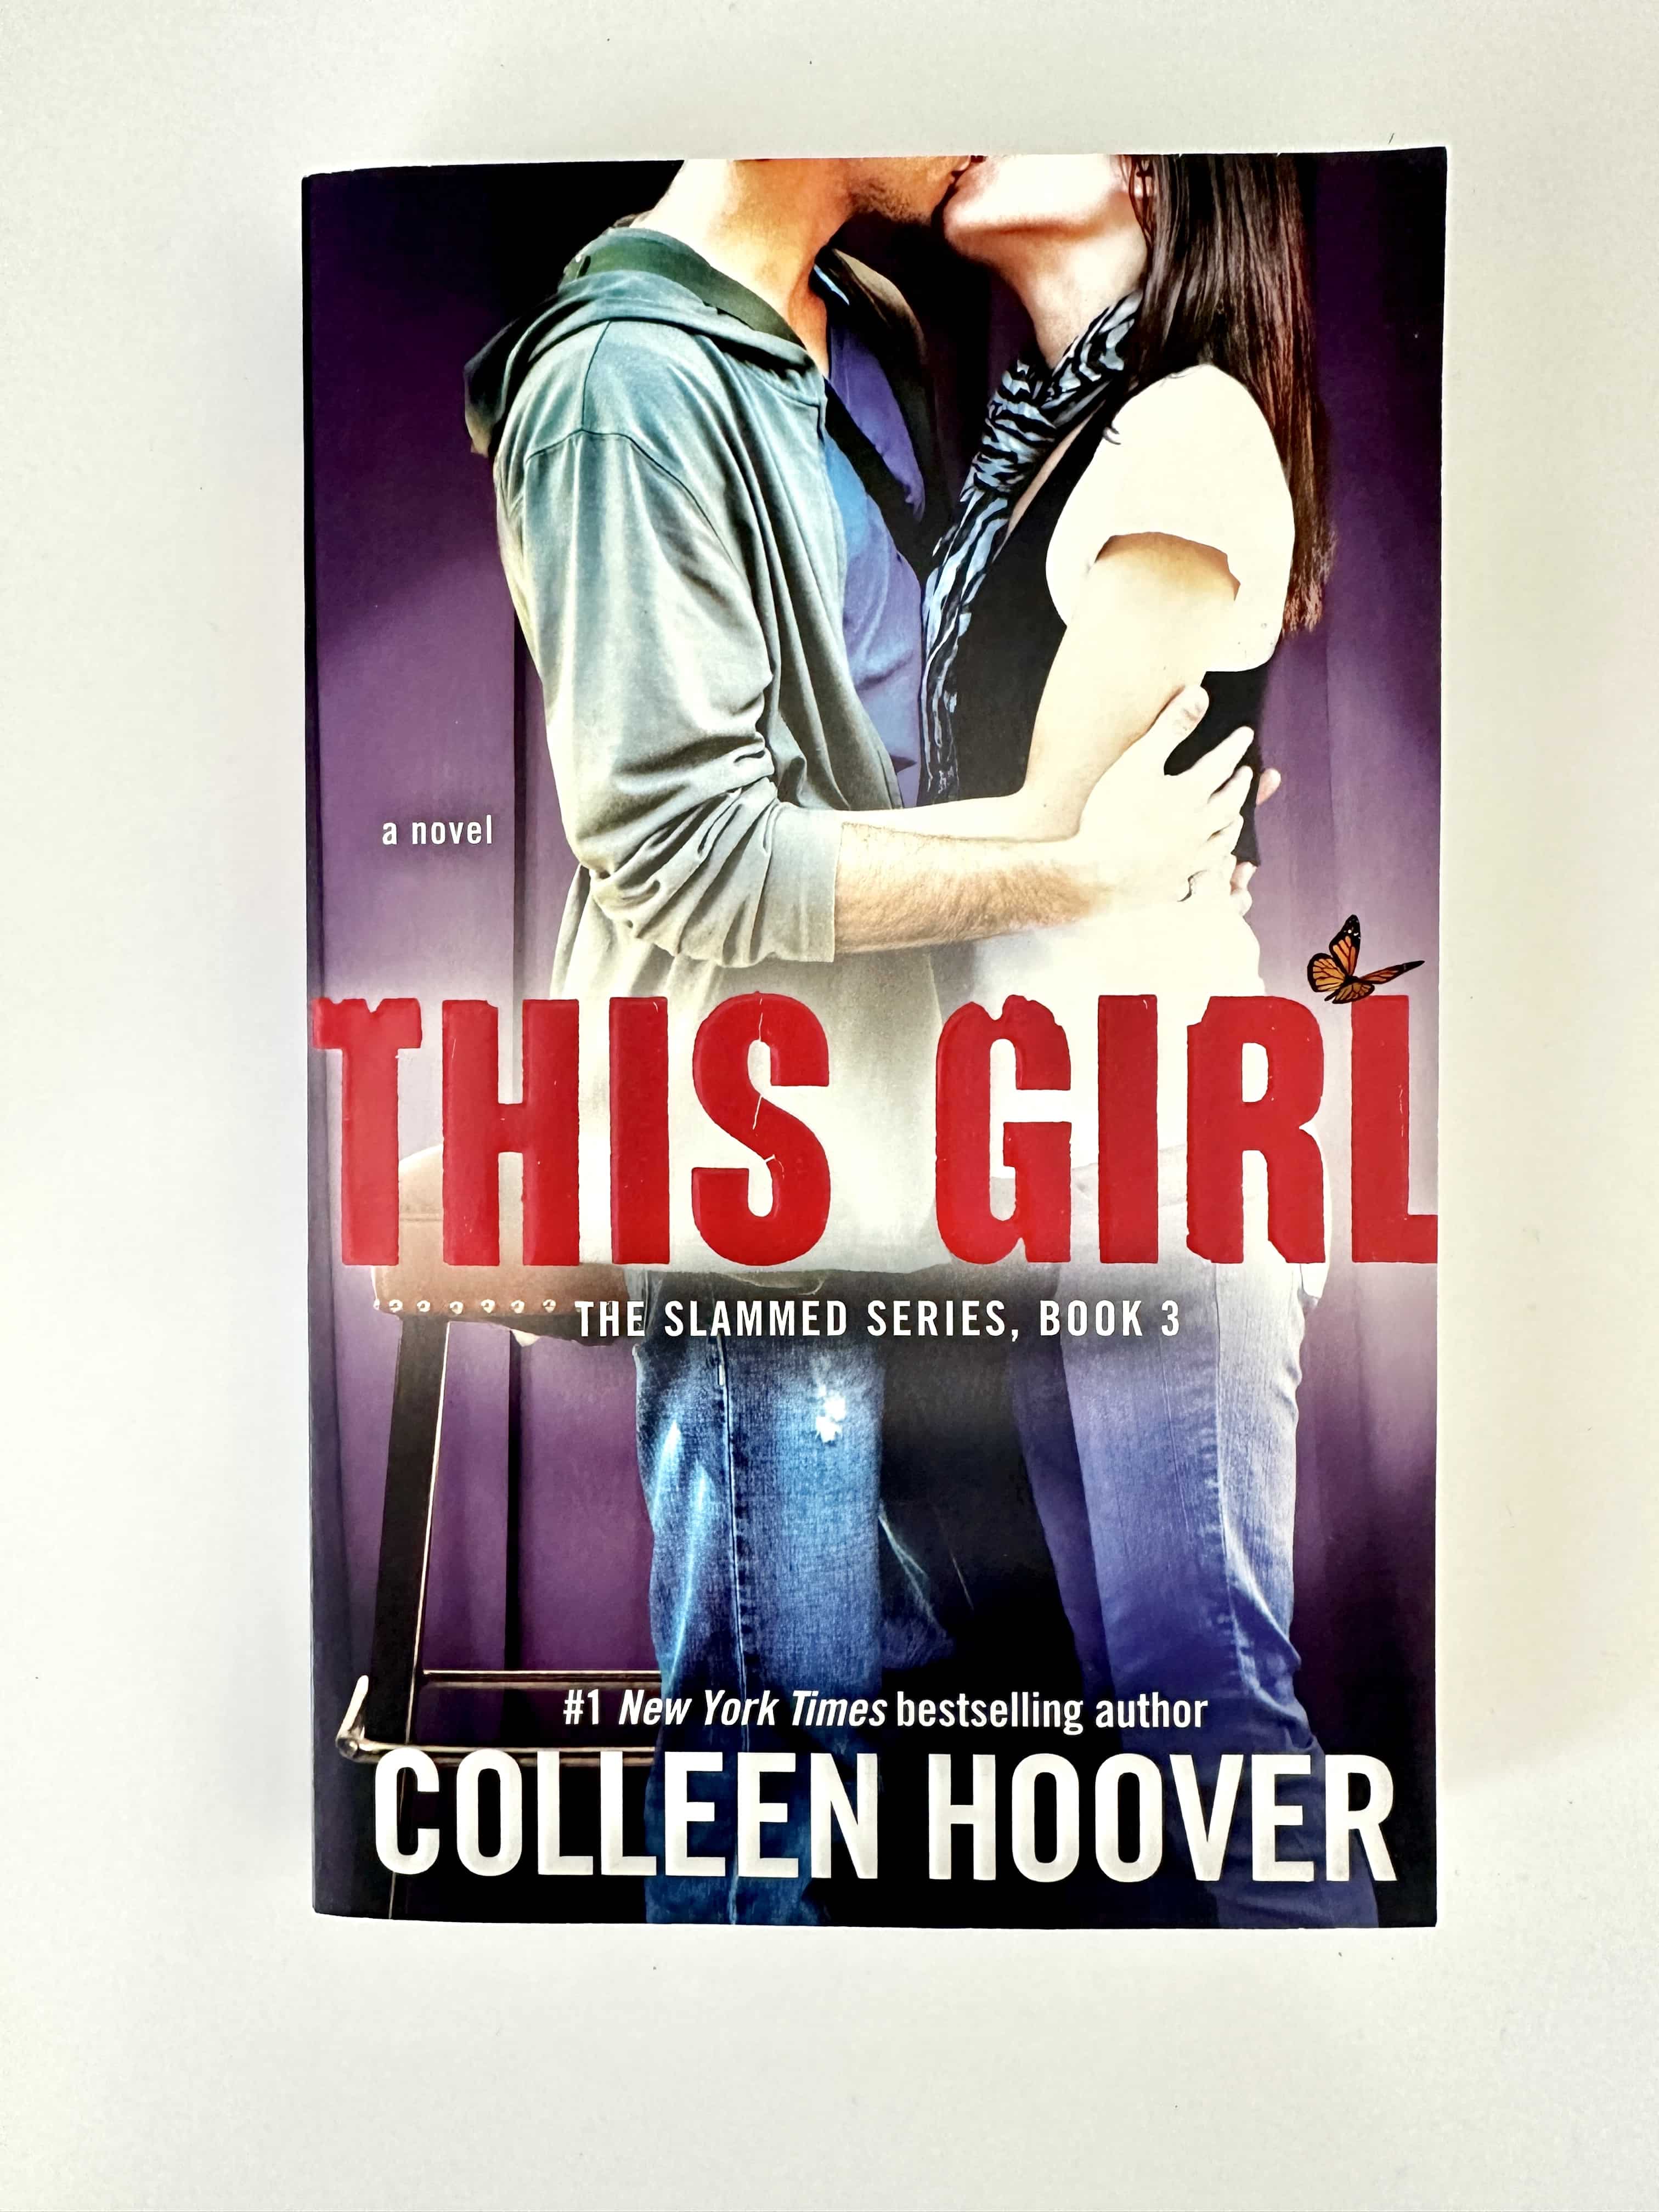 Colleen Hoover Books in Order: Complete Series List